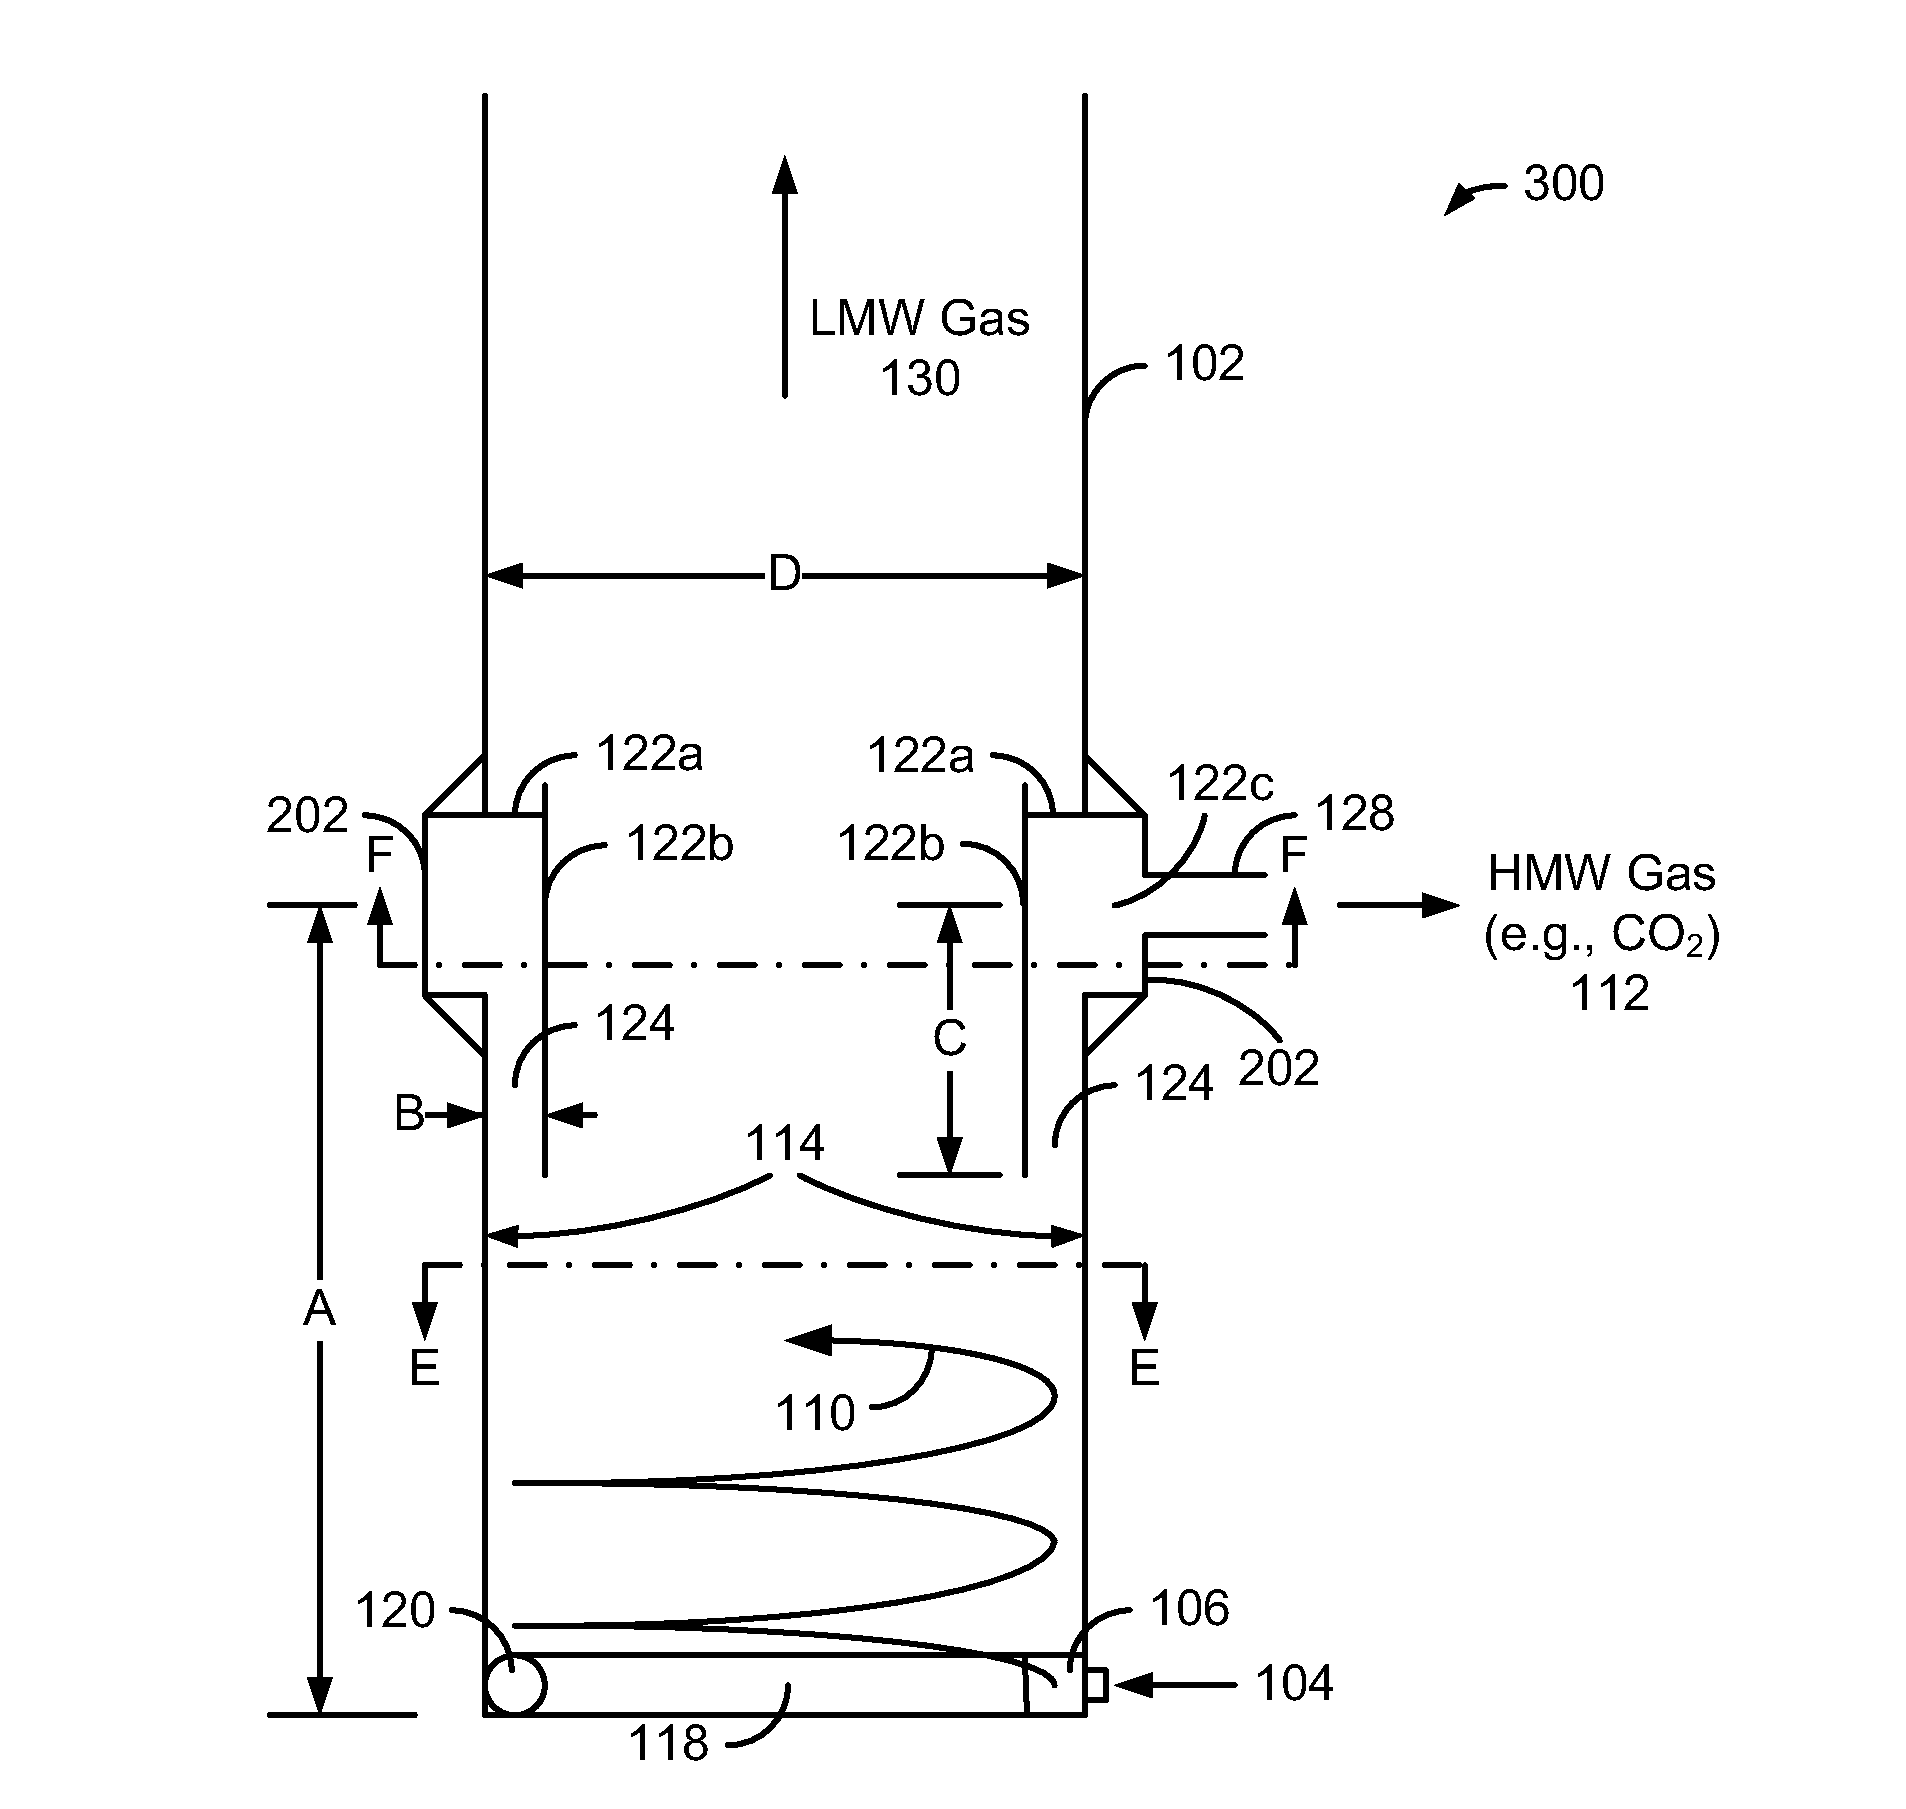 Method for separating high molecular weight gases from a combustion source